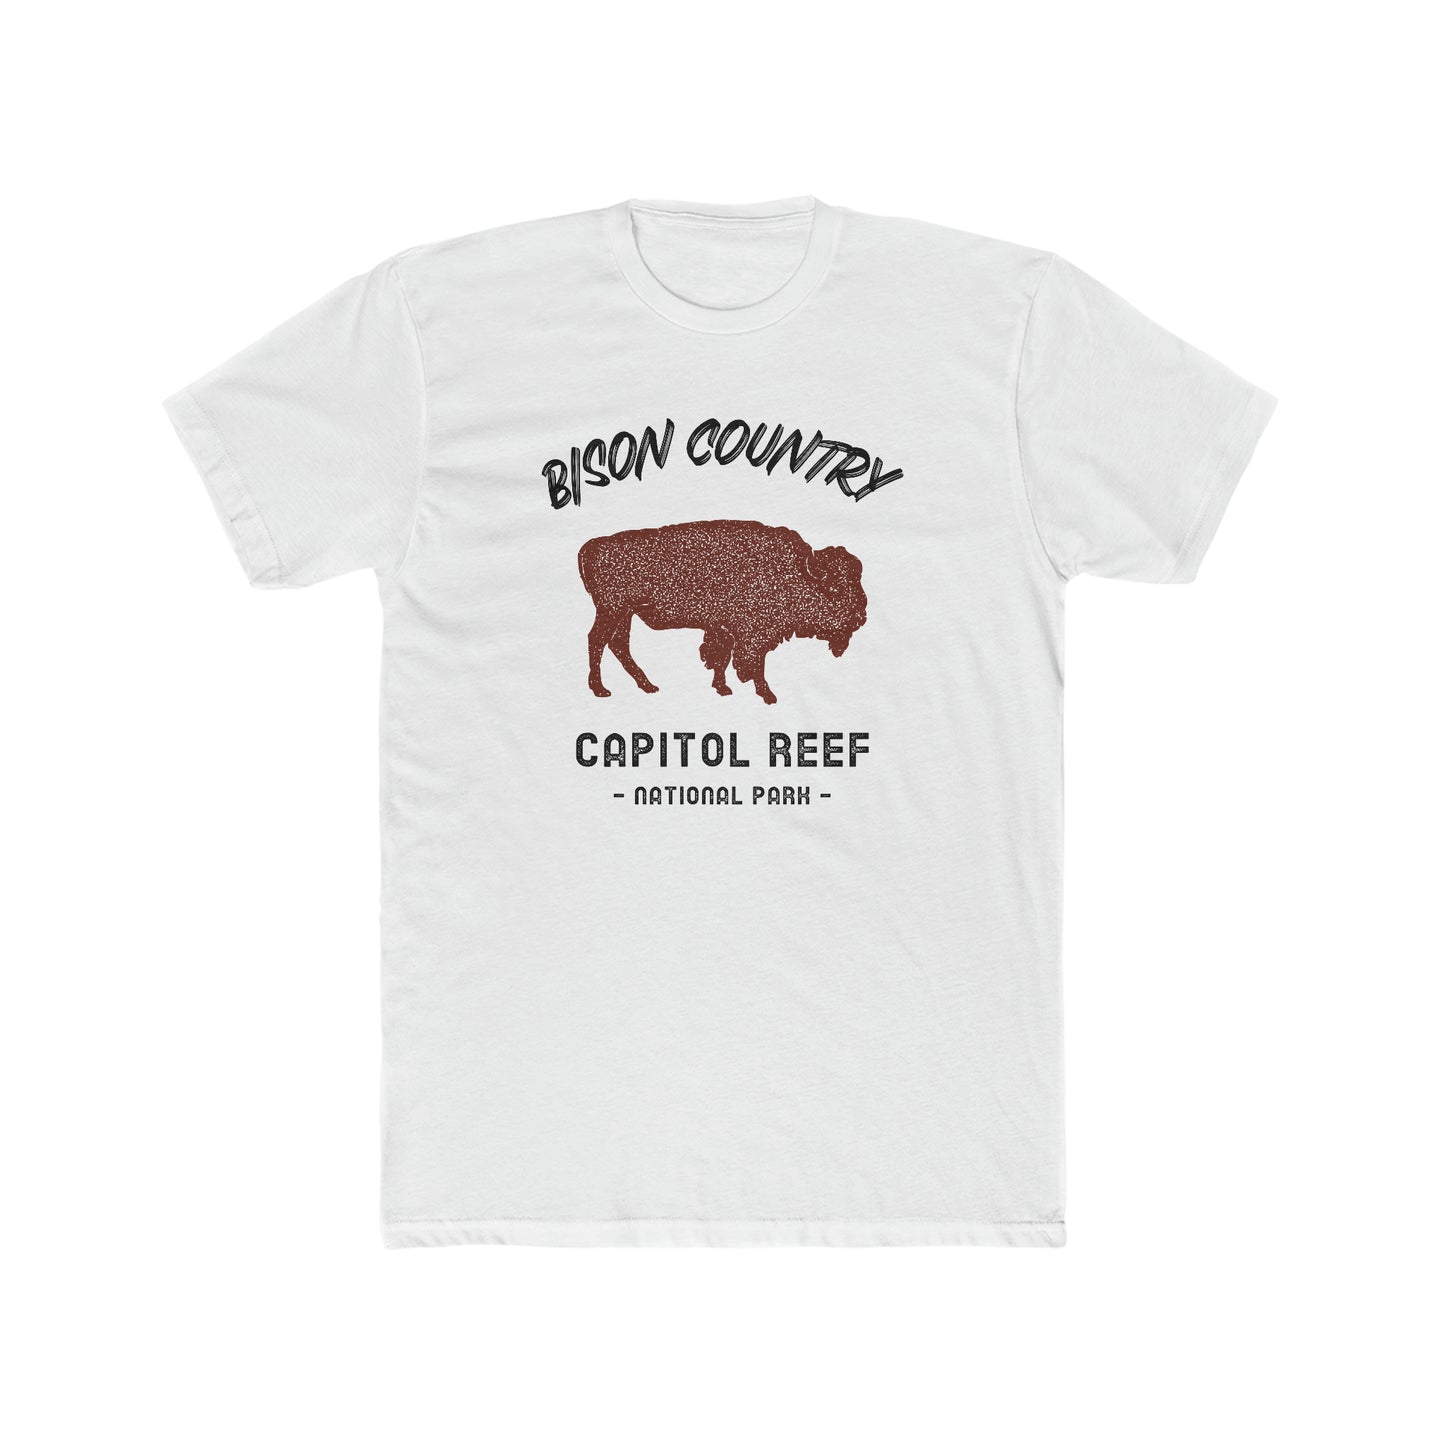 Capitol Reef National Park T-Shirt - Bison Country